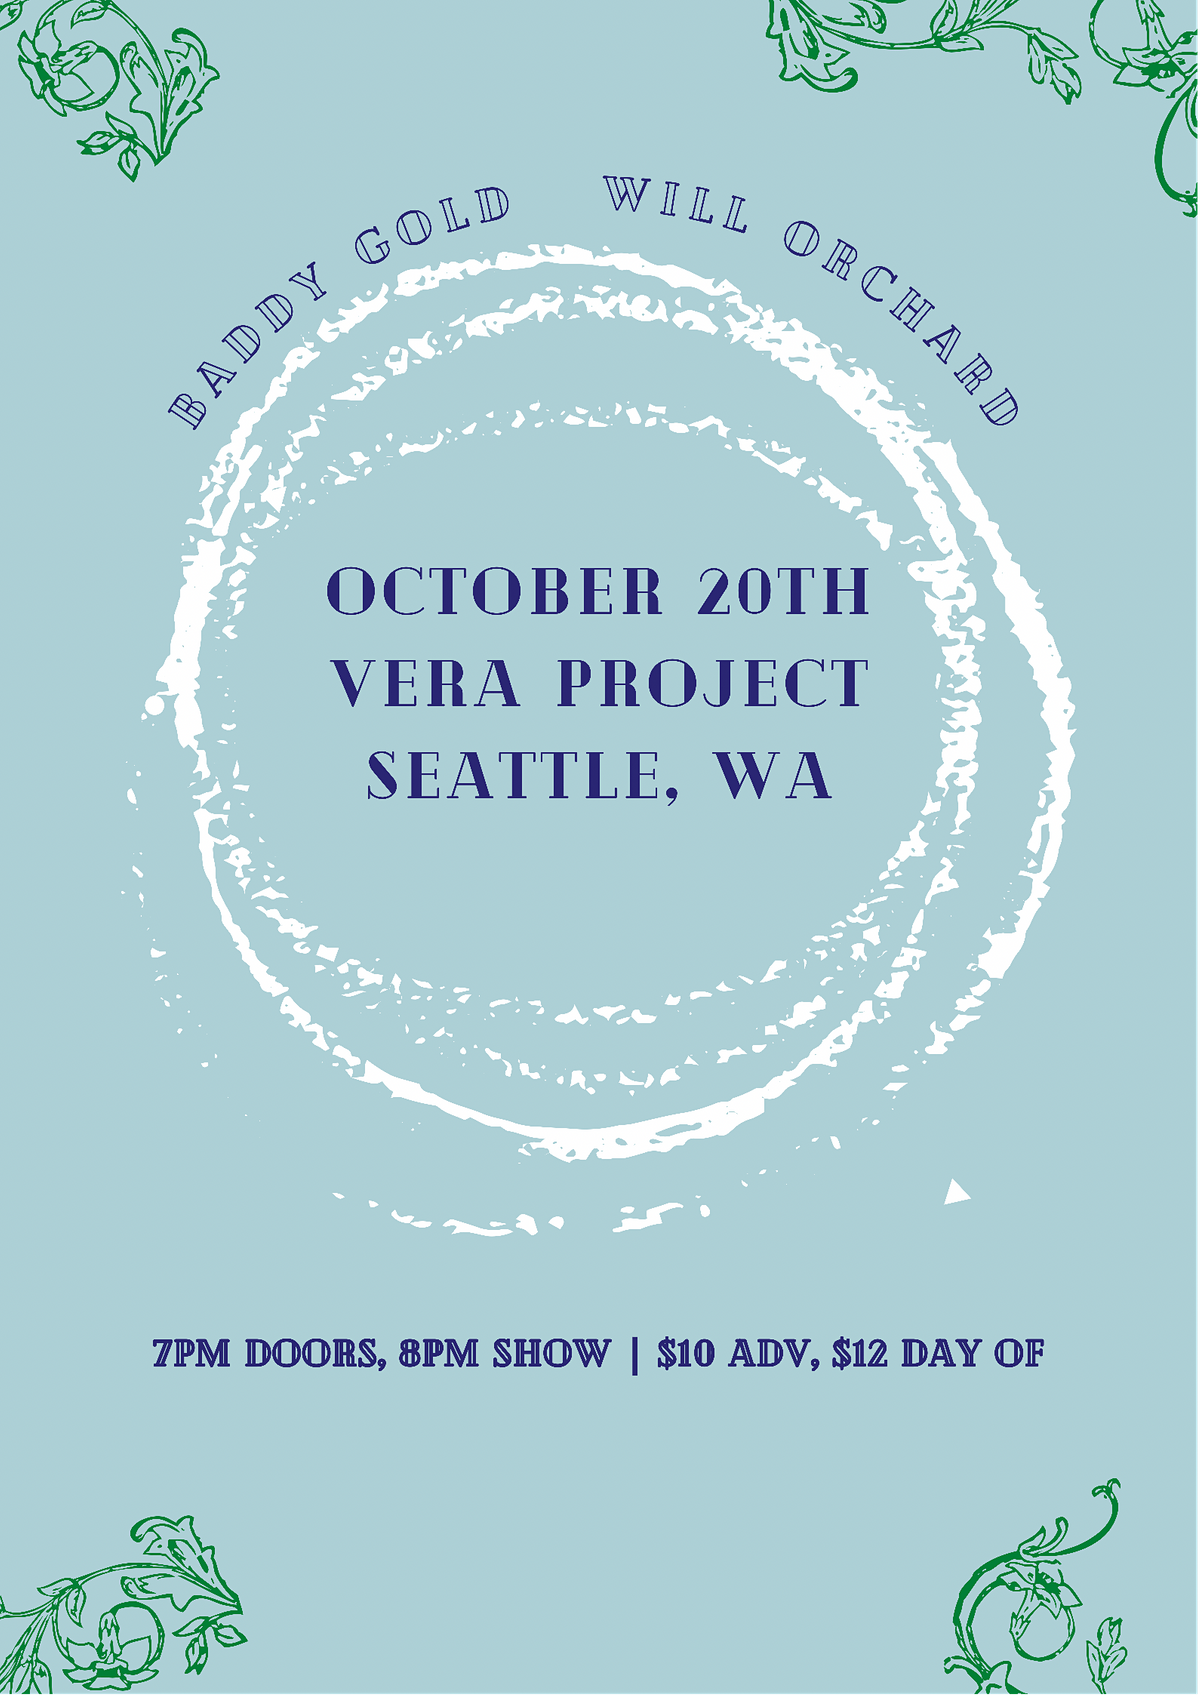 Baddy Gold & Will Orchard @ The Vera Project